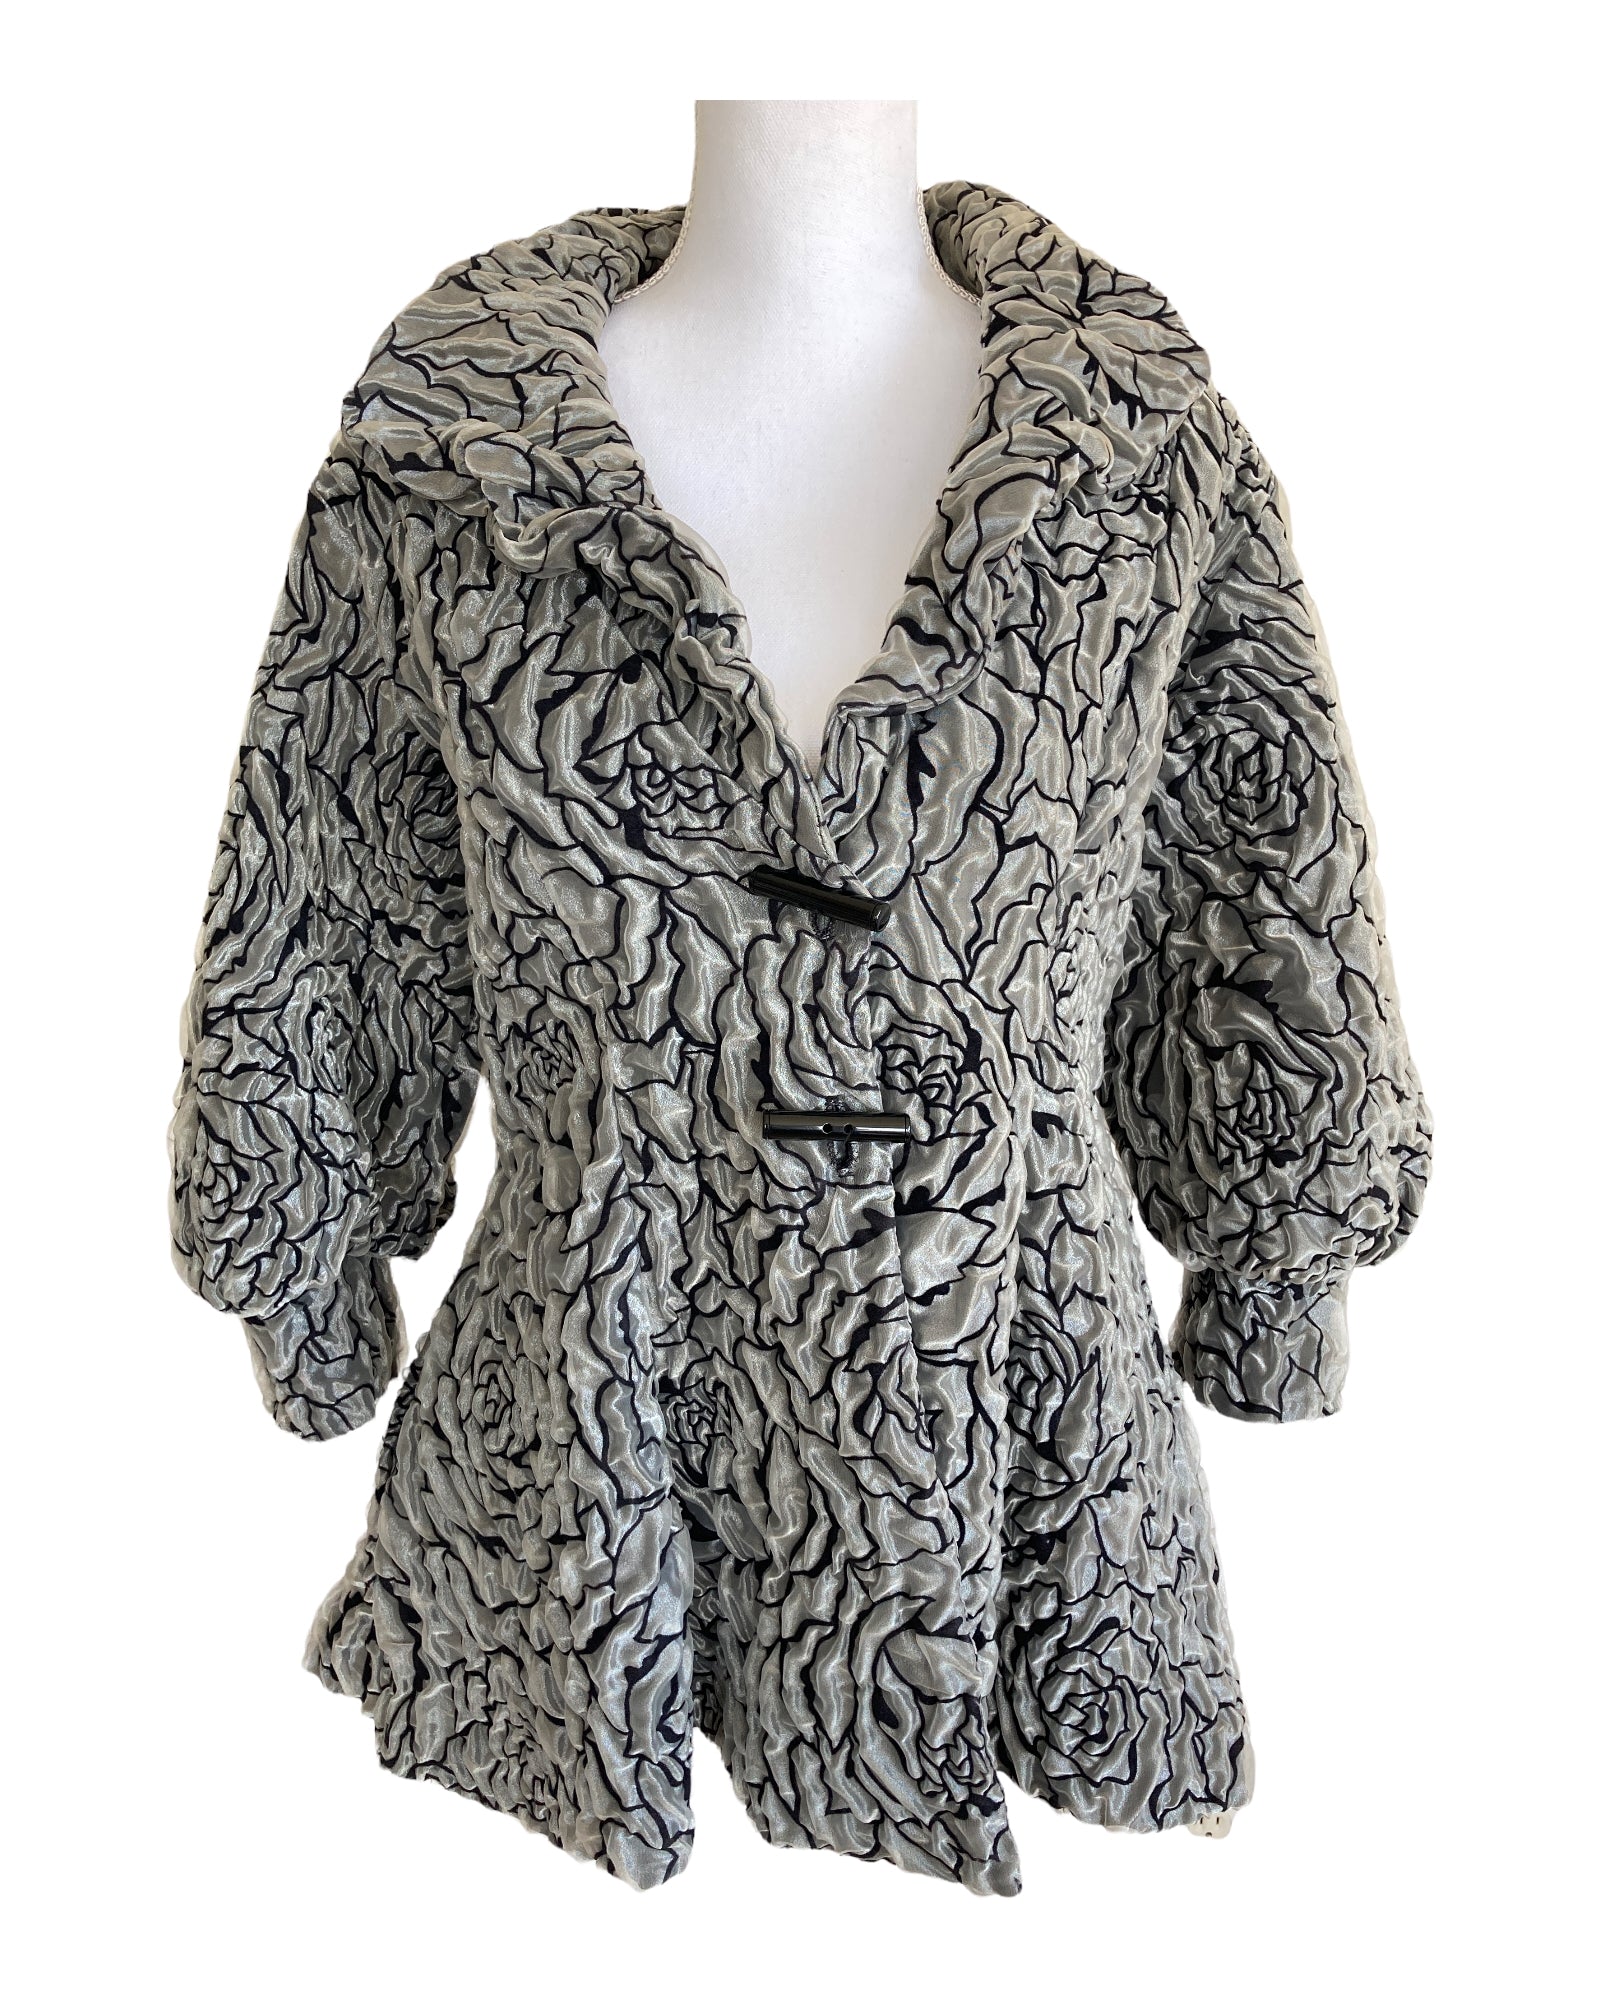 IC by Connie K Silver Coat, S